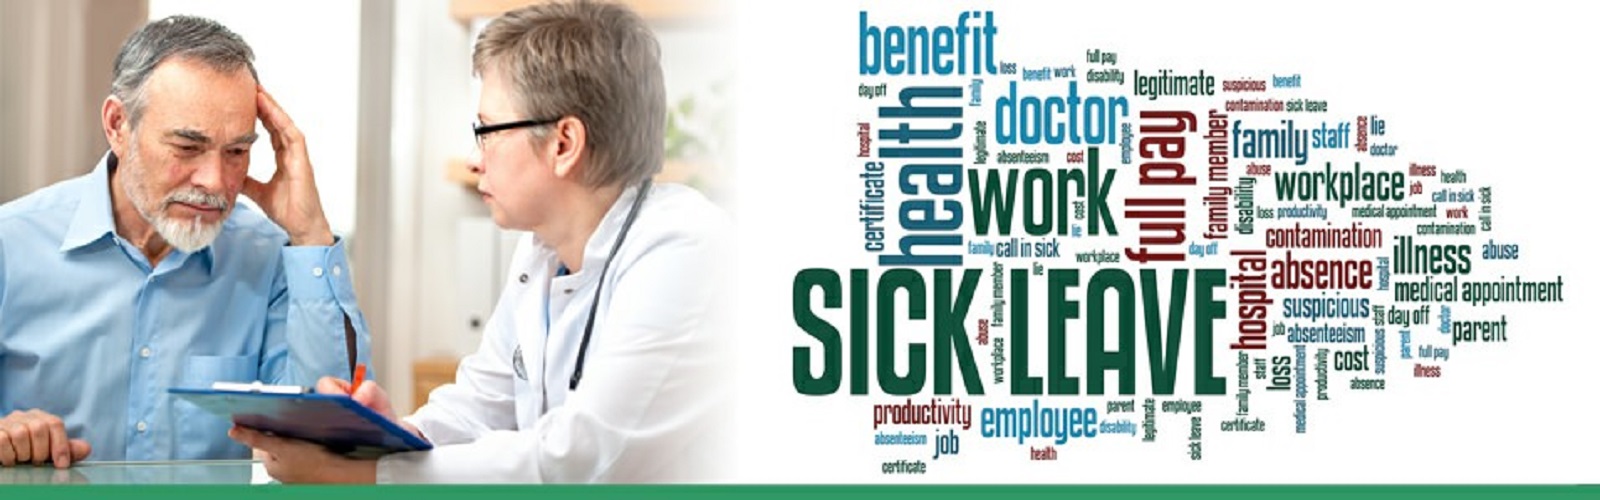 Sickness absence managment and return to work